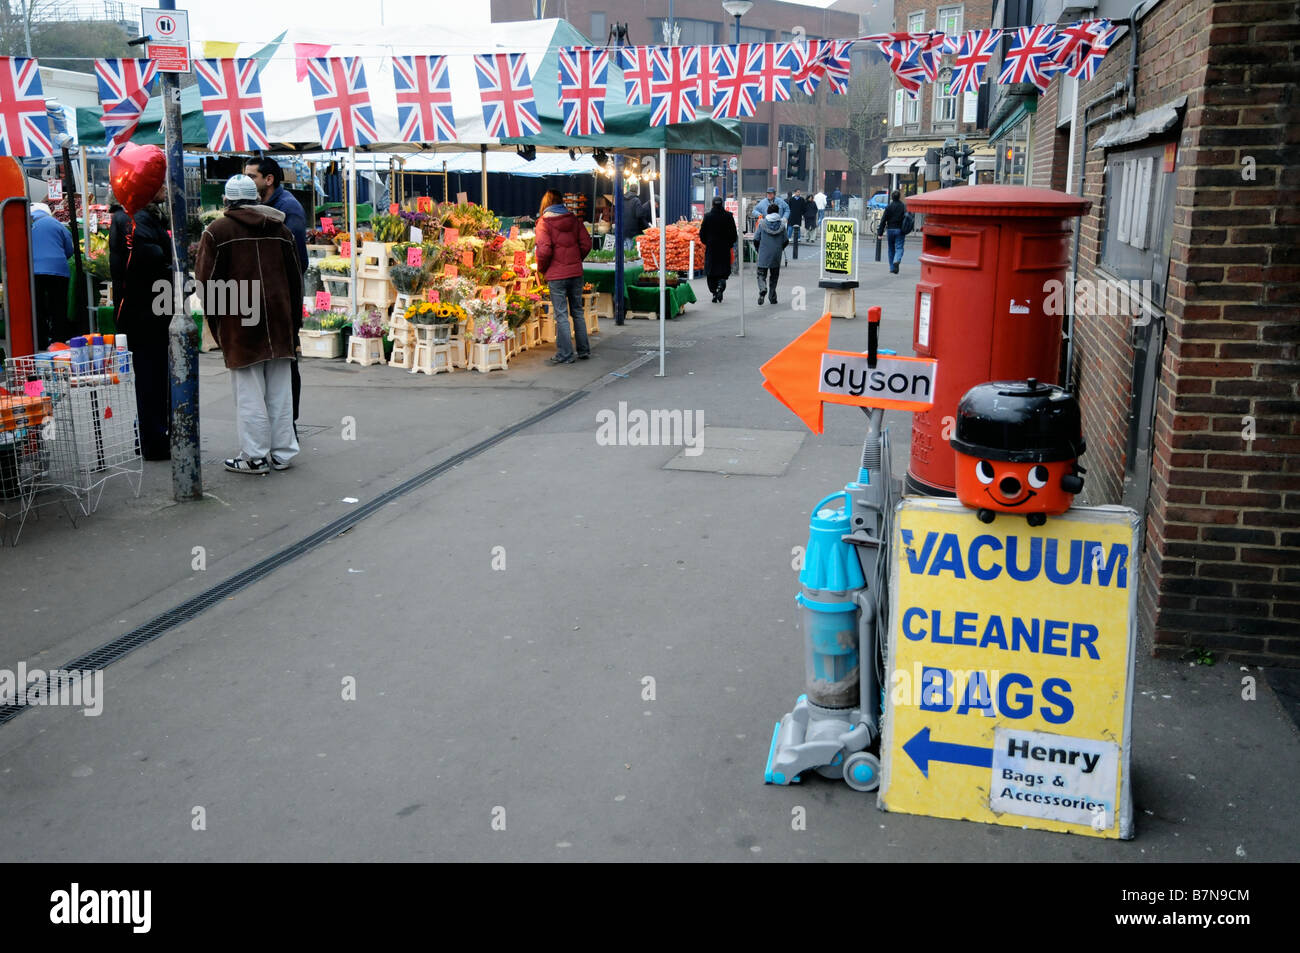 A scene from Woking Market in Surrey, England. Stock Photo